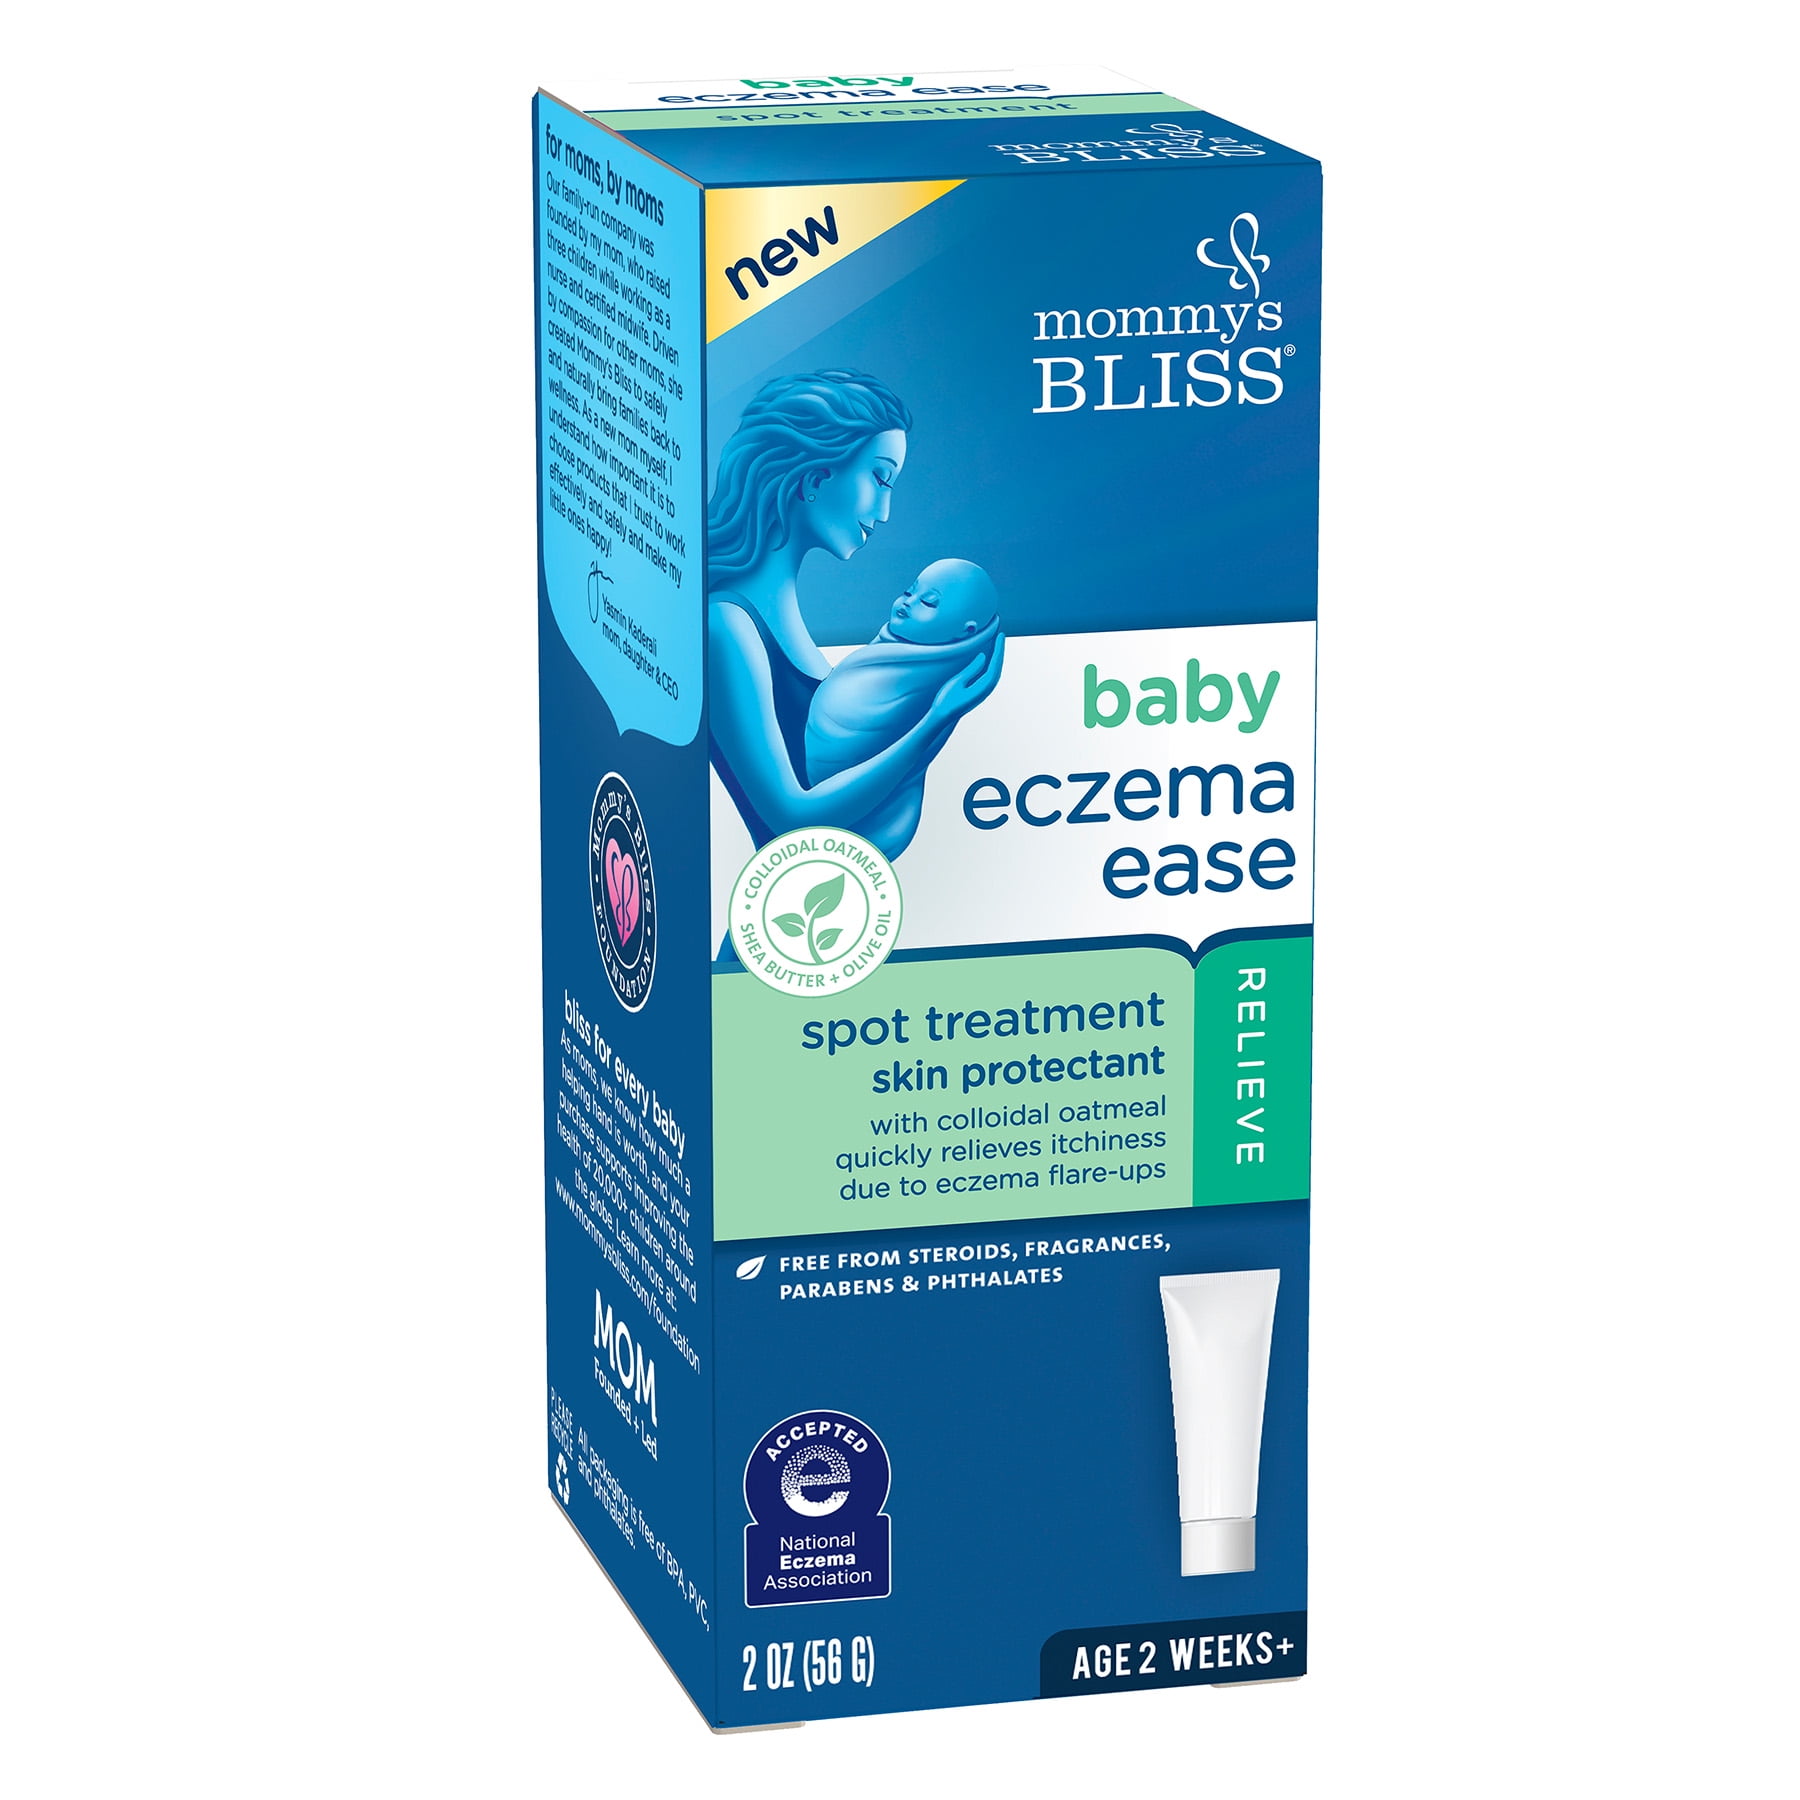 Mommy's Bliss Baby Eczema Ease Spot Treatment Cream, Skin Protectant, over-the-Counter, 2 oz